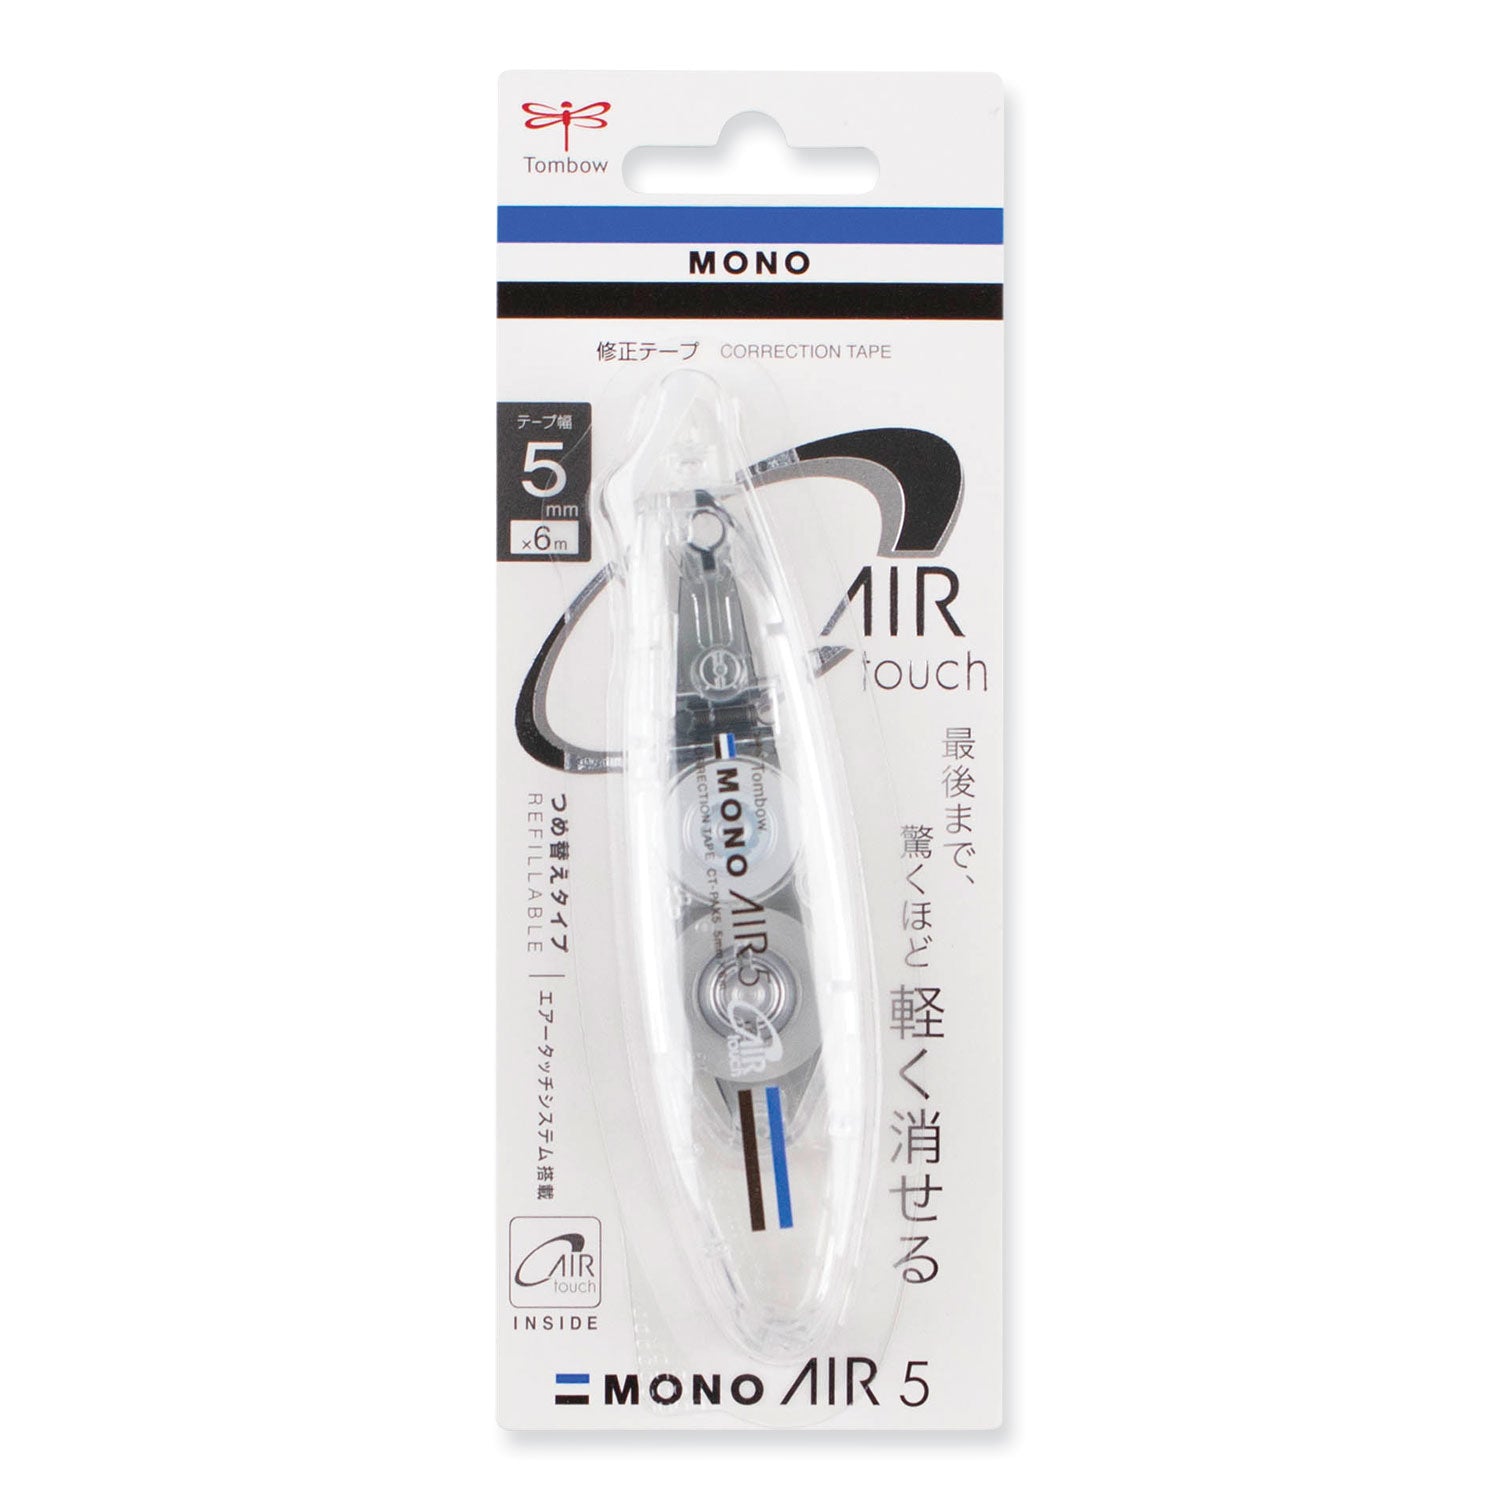 mono-air-pen-type-correction-tape-refillable-clear-applicator-019-x-236_tom68696 - 1